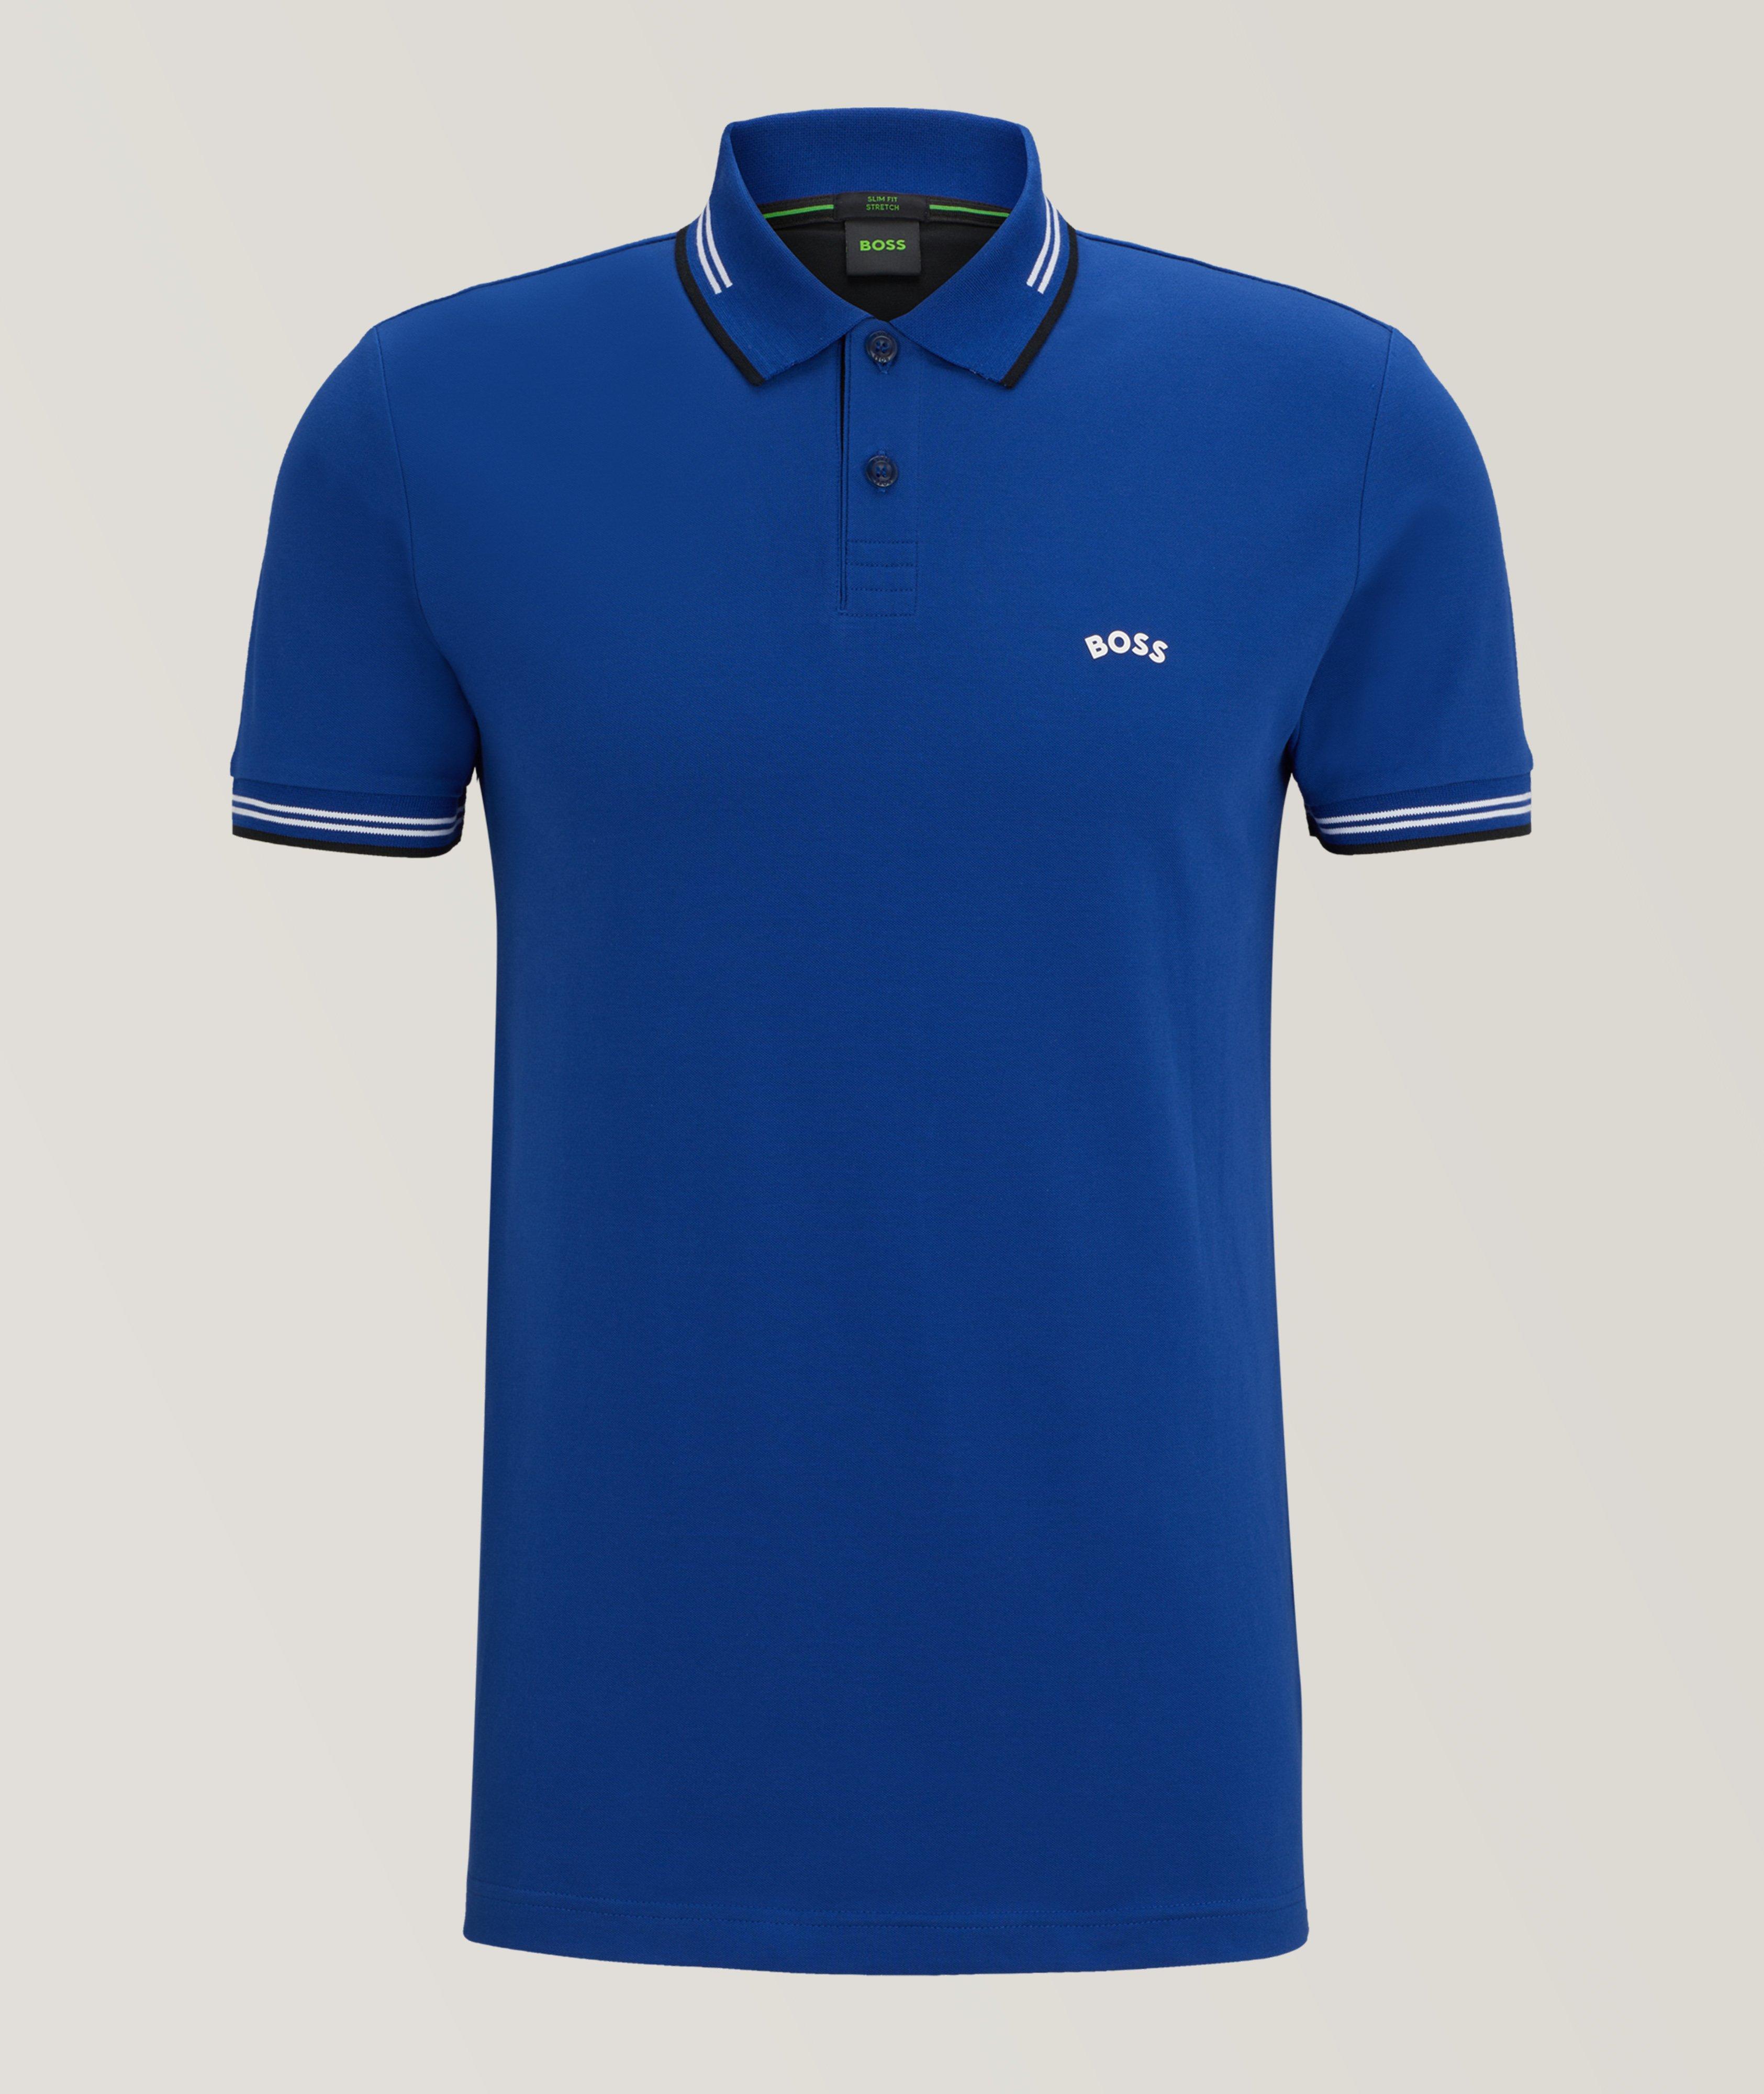 Paul Curved Stretch-Cotton Knit Polo image 0